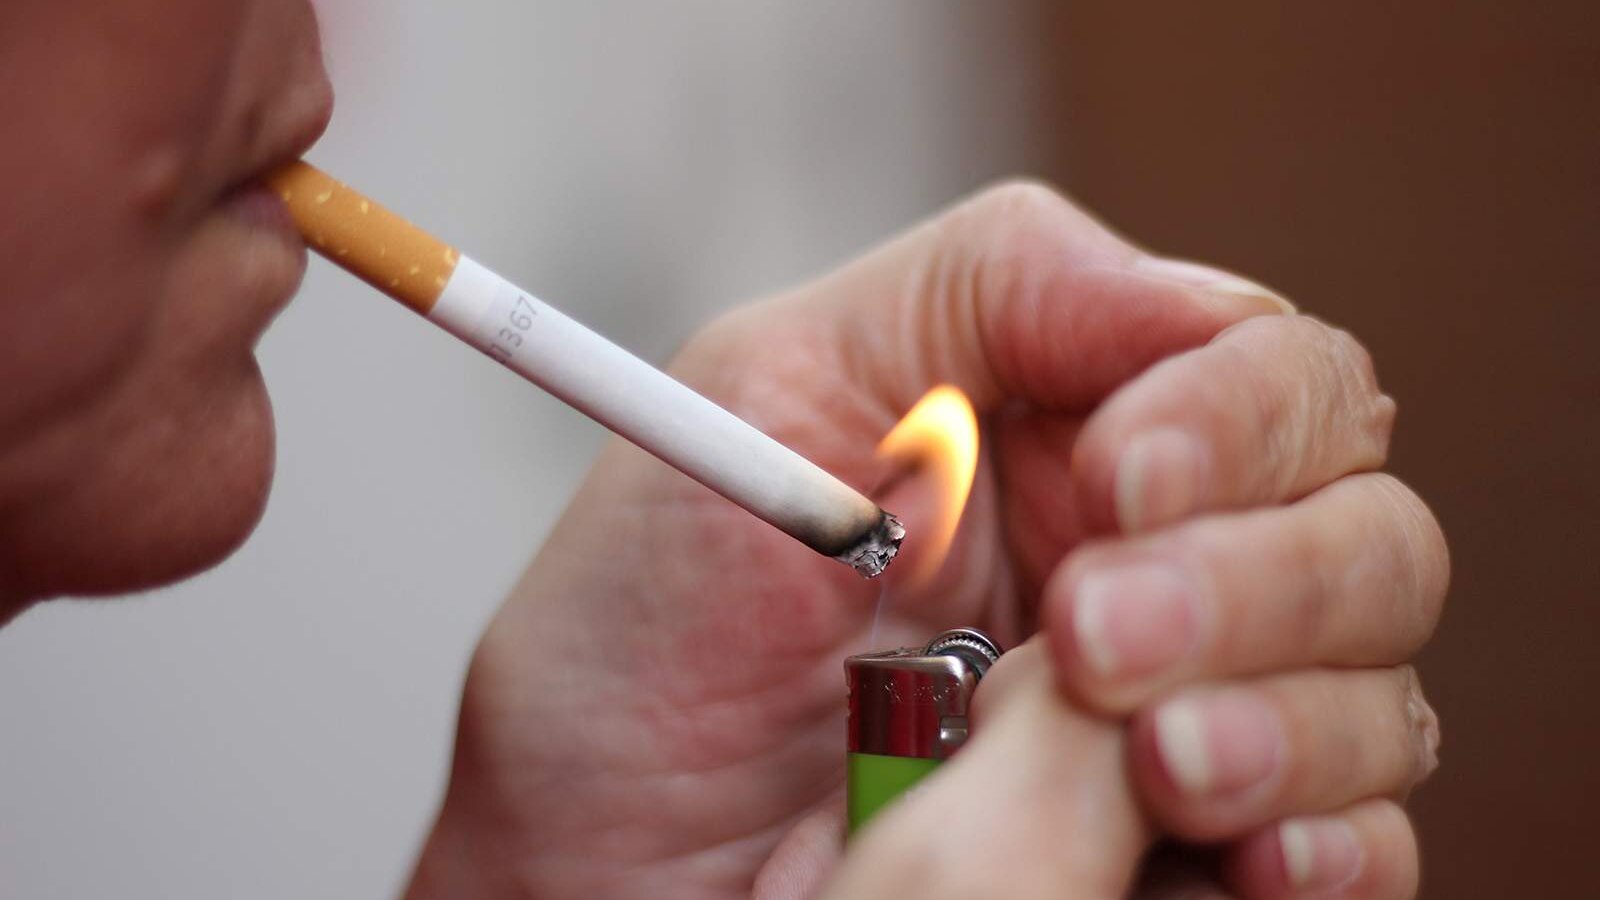 uk house of commons passes bill to ban anyone born after 2009 from buying cigarettes